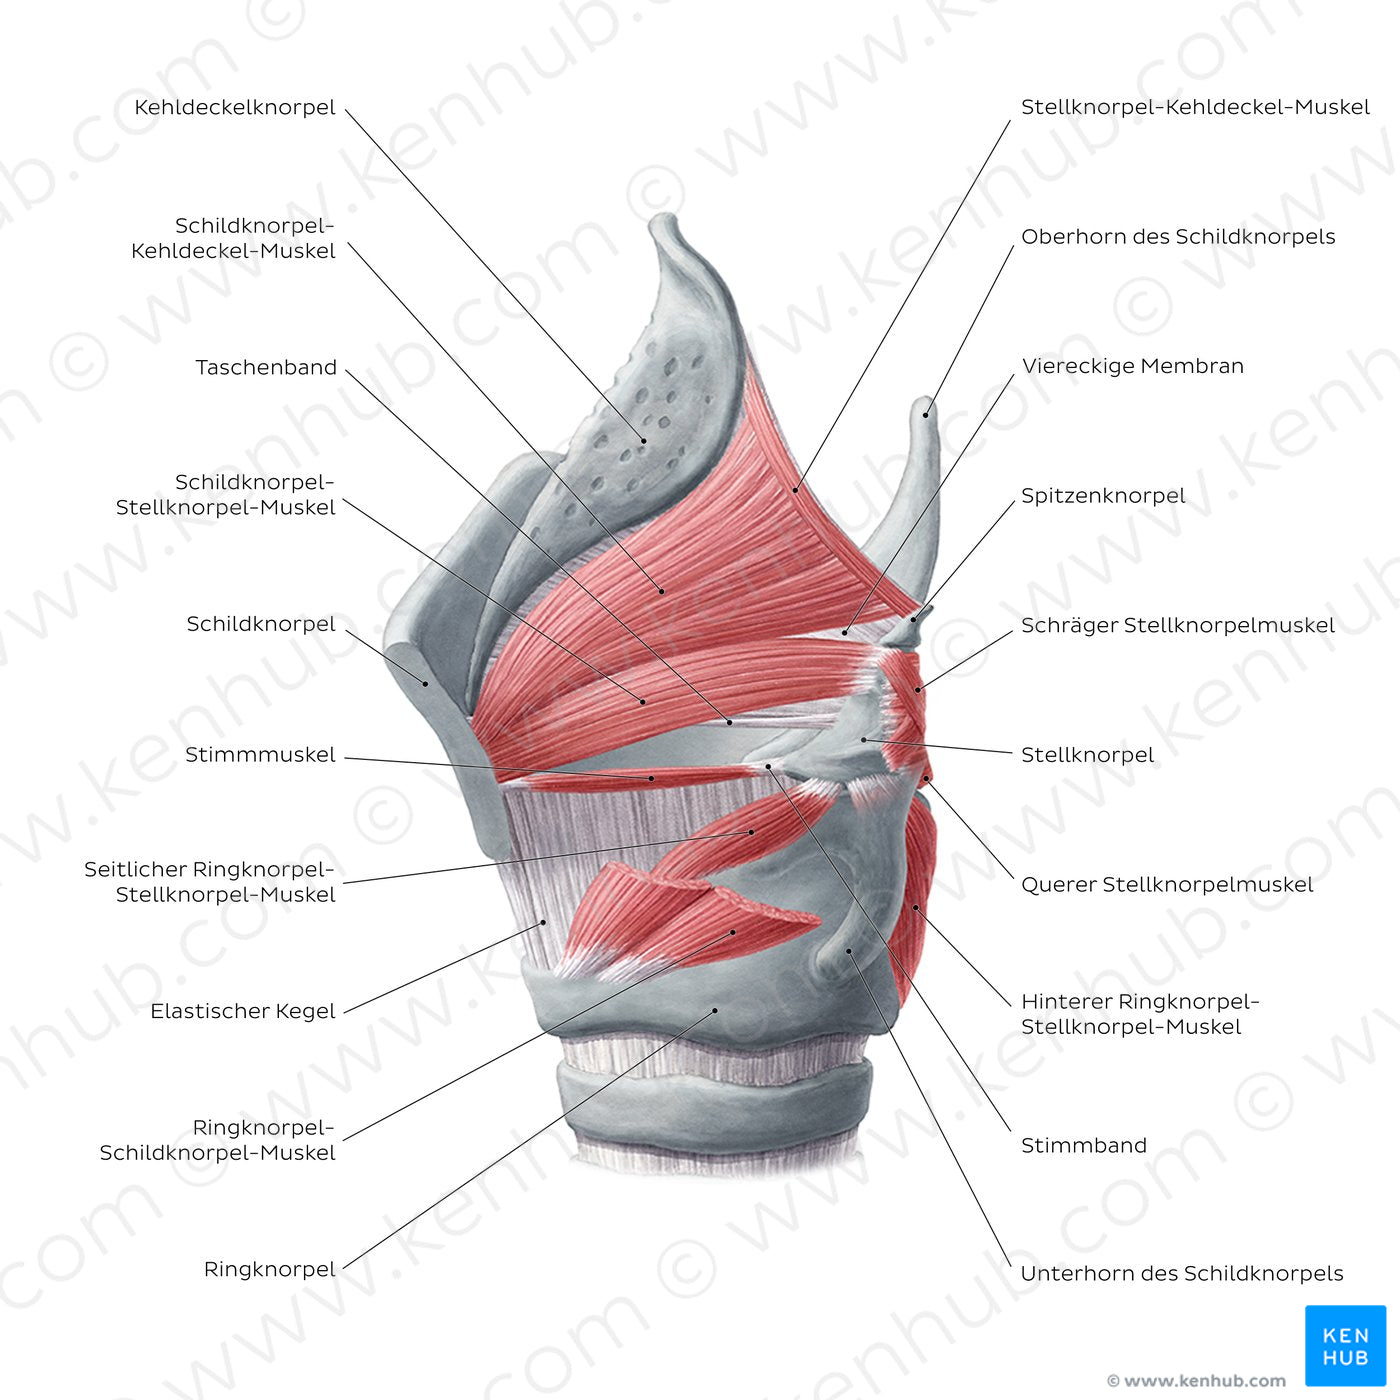 Muscles of the larynx: lateral view (German)